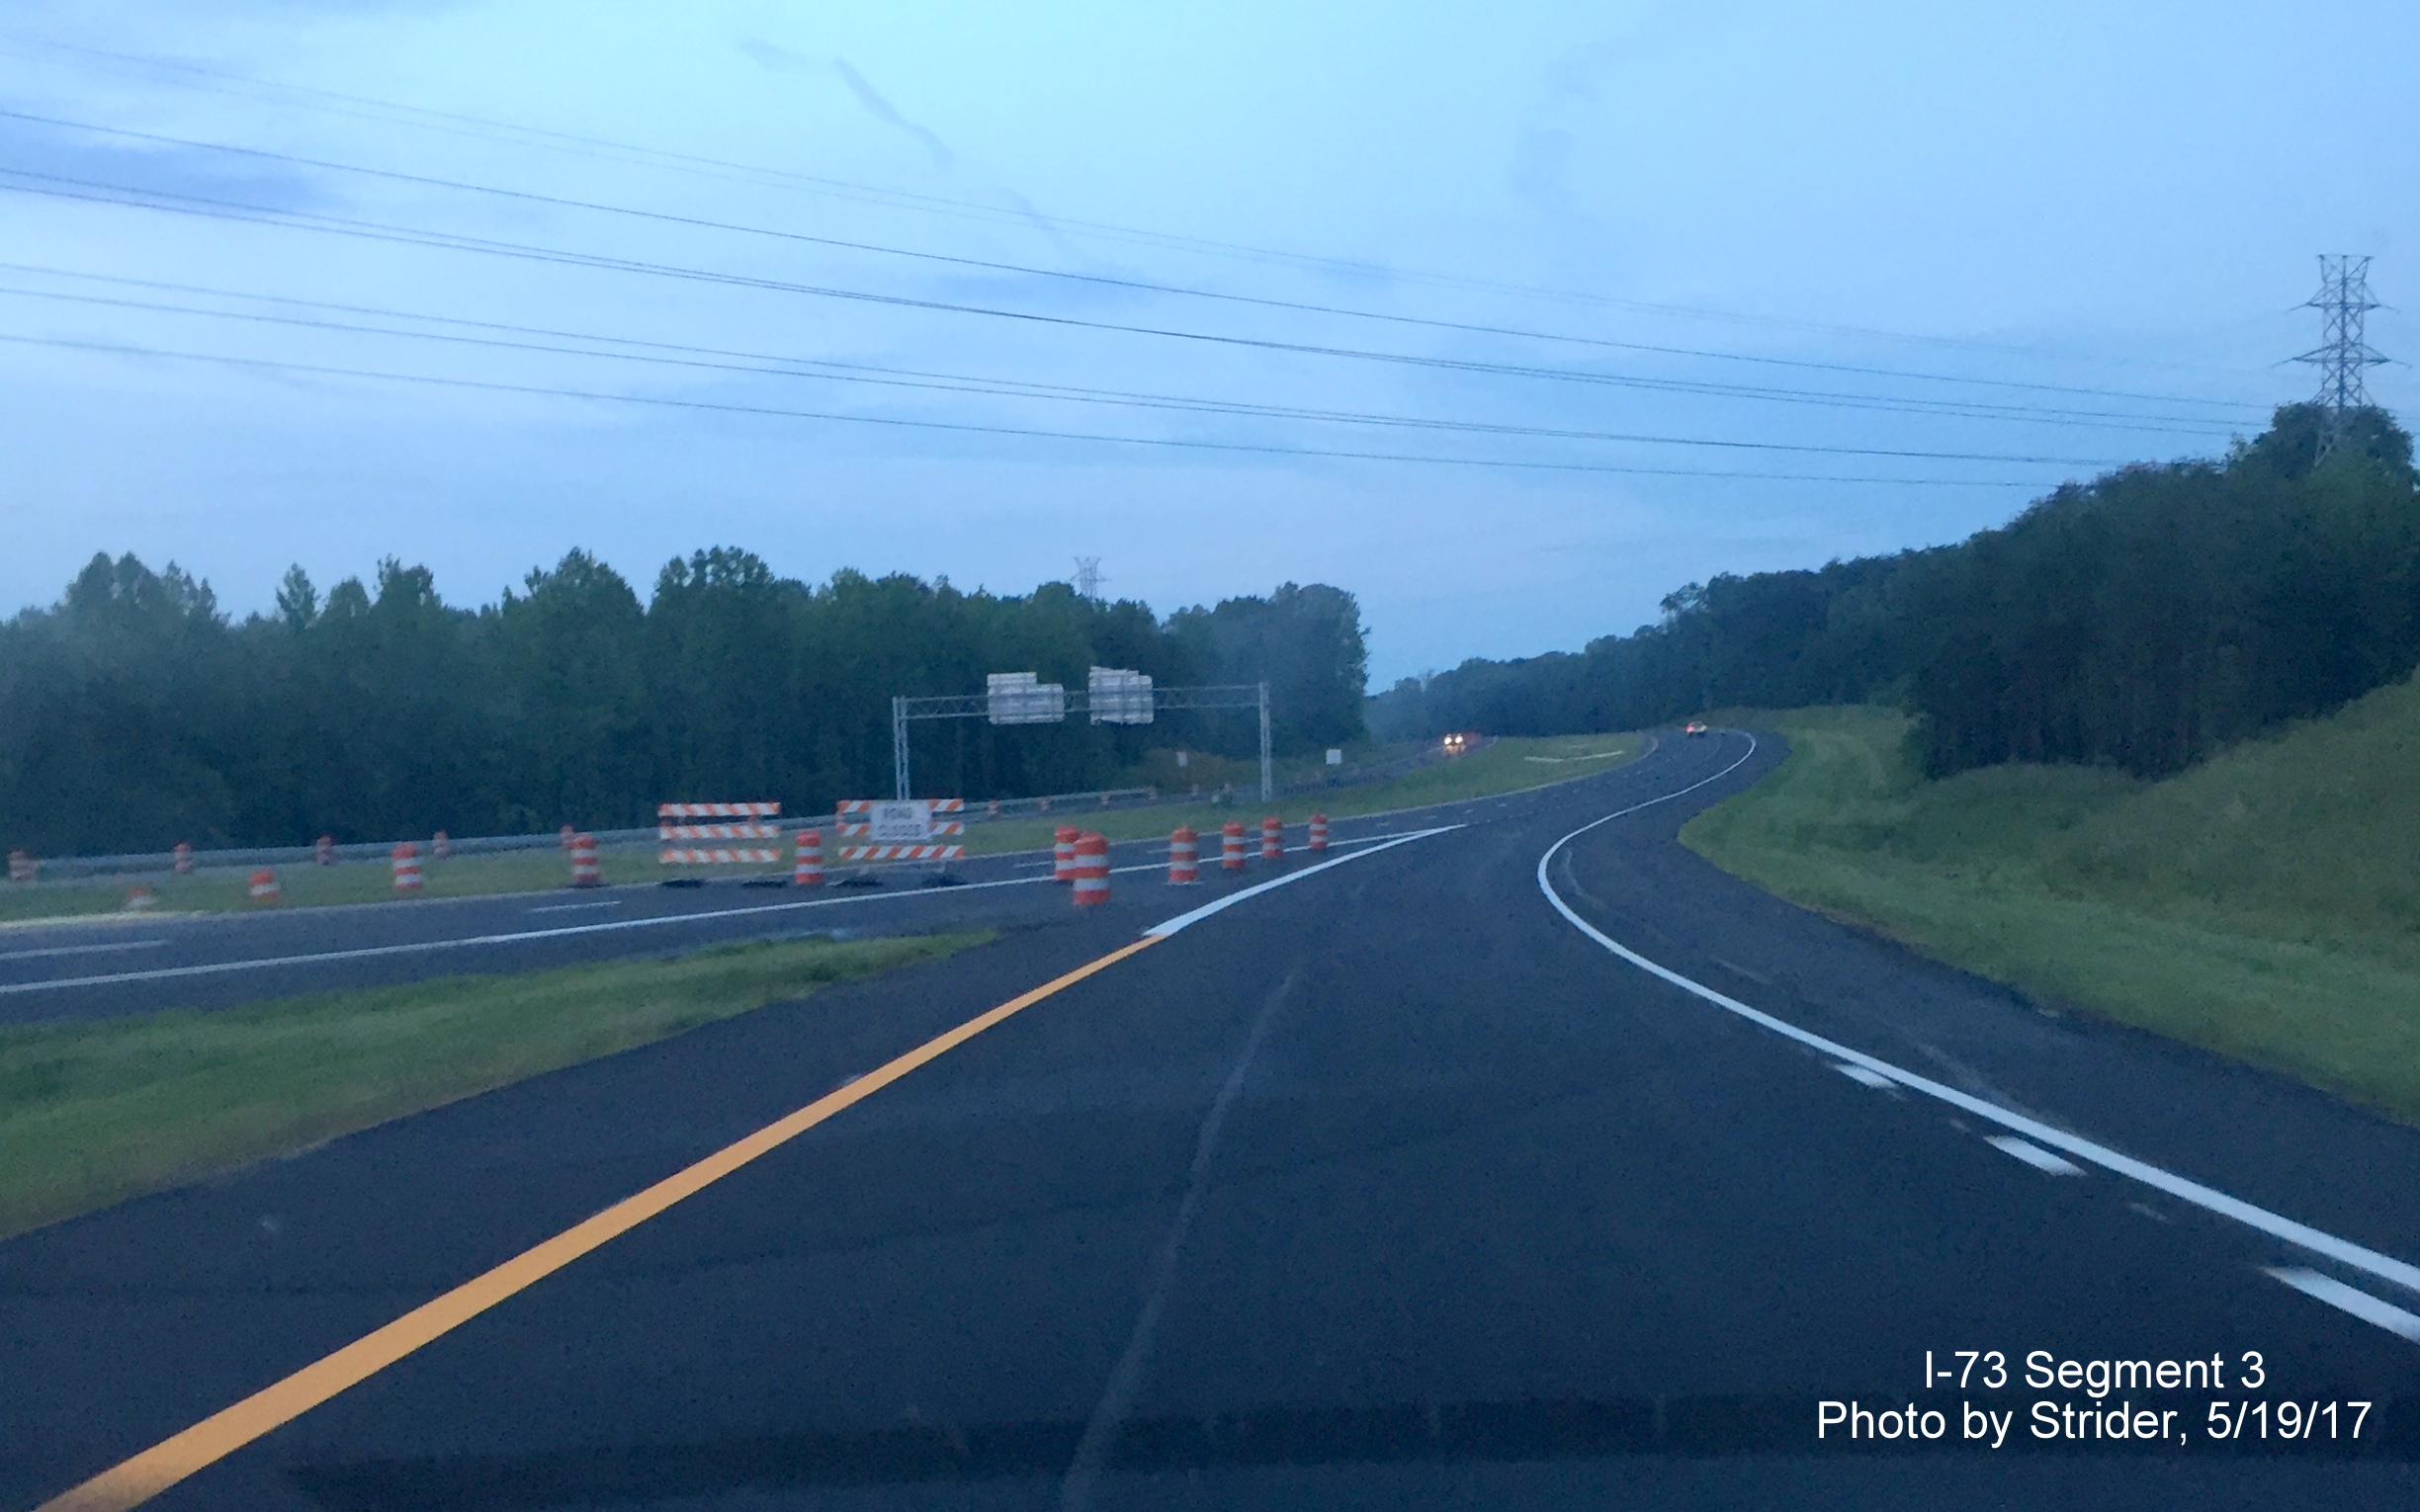 Image taken of view on ramp from NC 68 North entering newly opened I-73 North roadway, by Strider